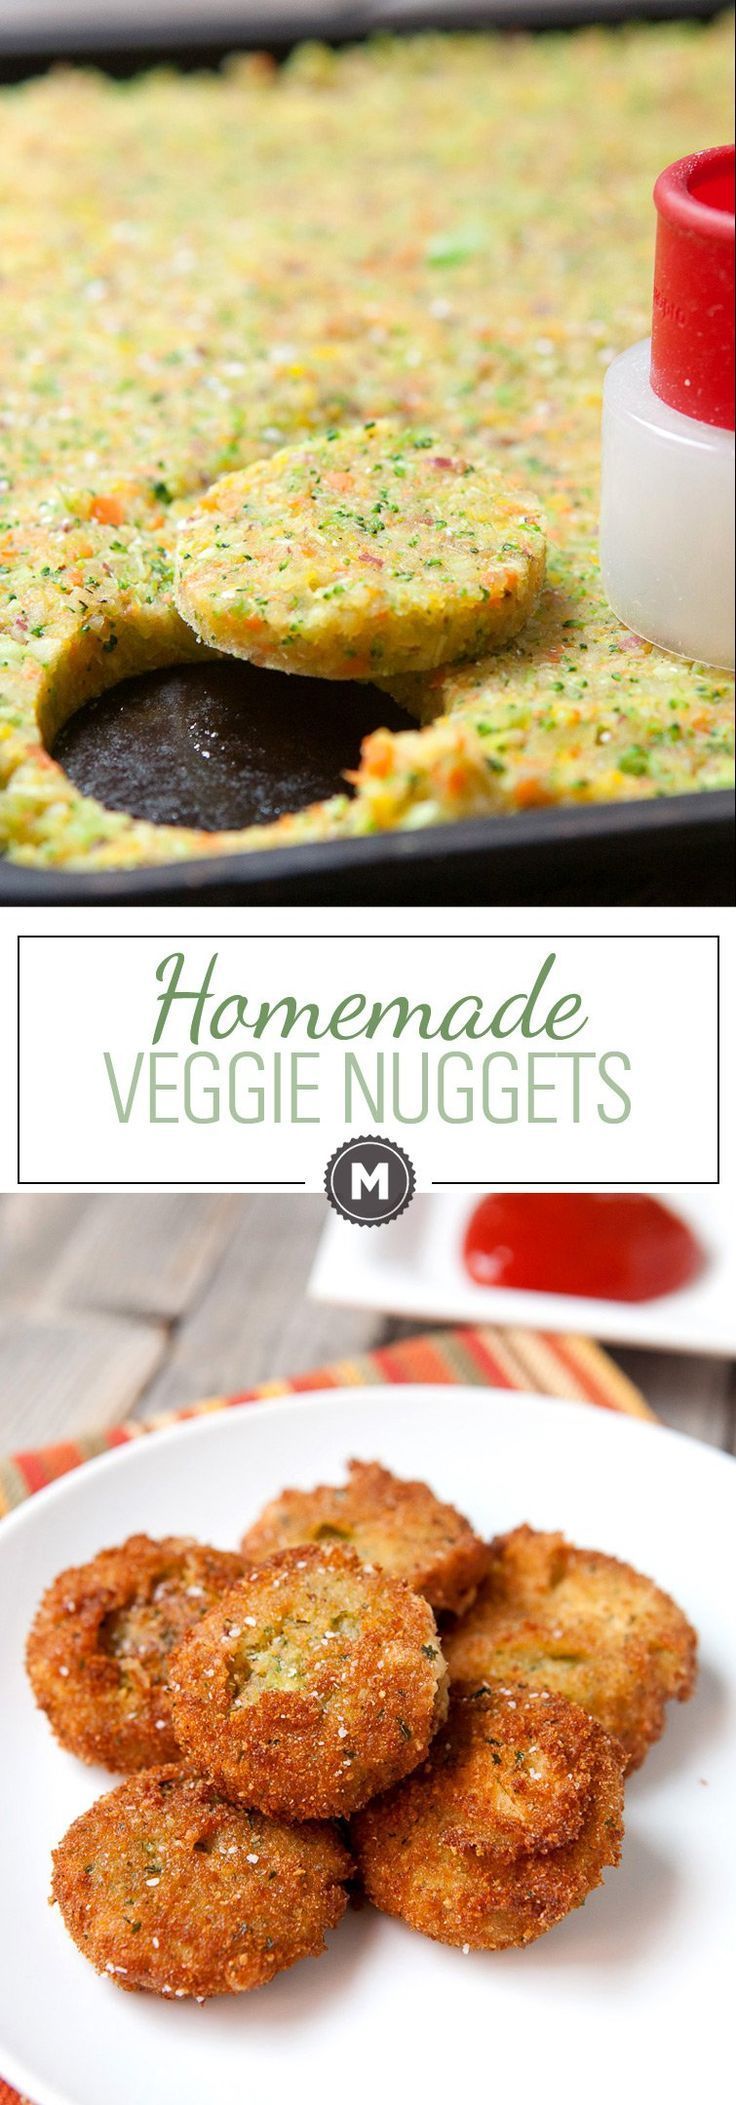 Homemade Veggie Nuggets: These are the perfect vegetarian alternative to the chicken nugget. Made with mashed carrots, broccoli,